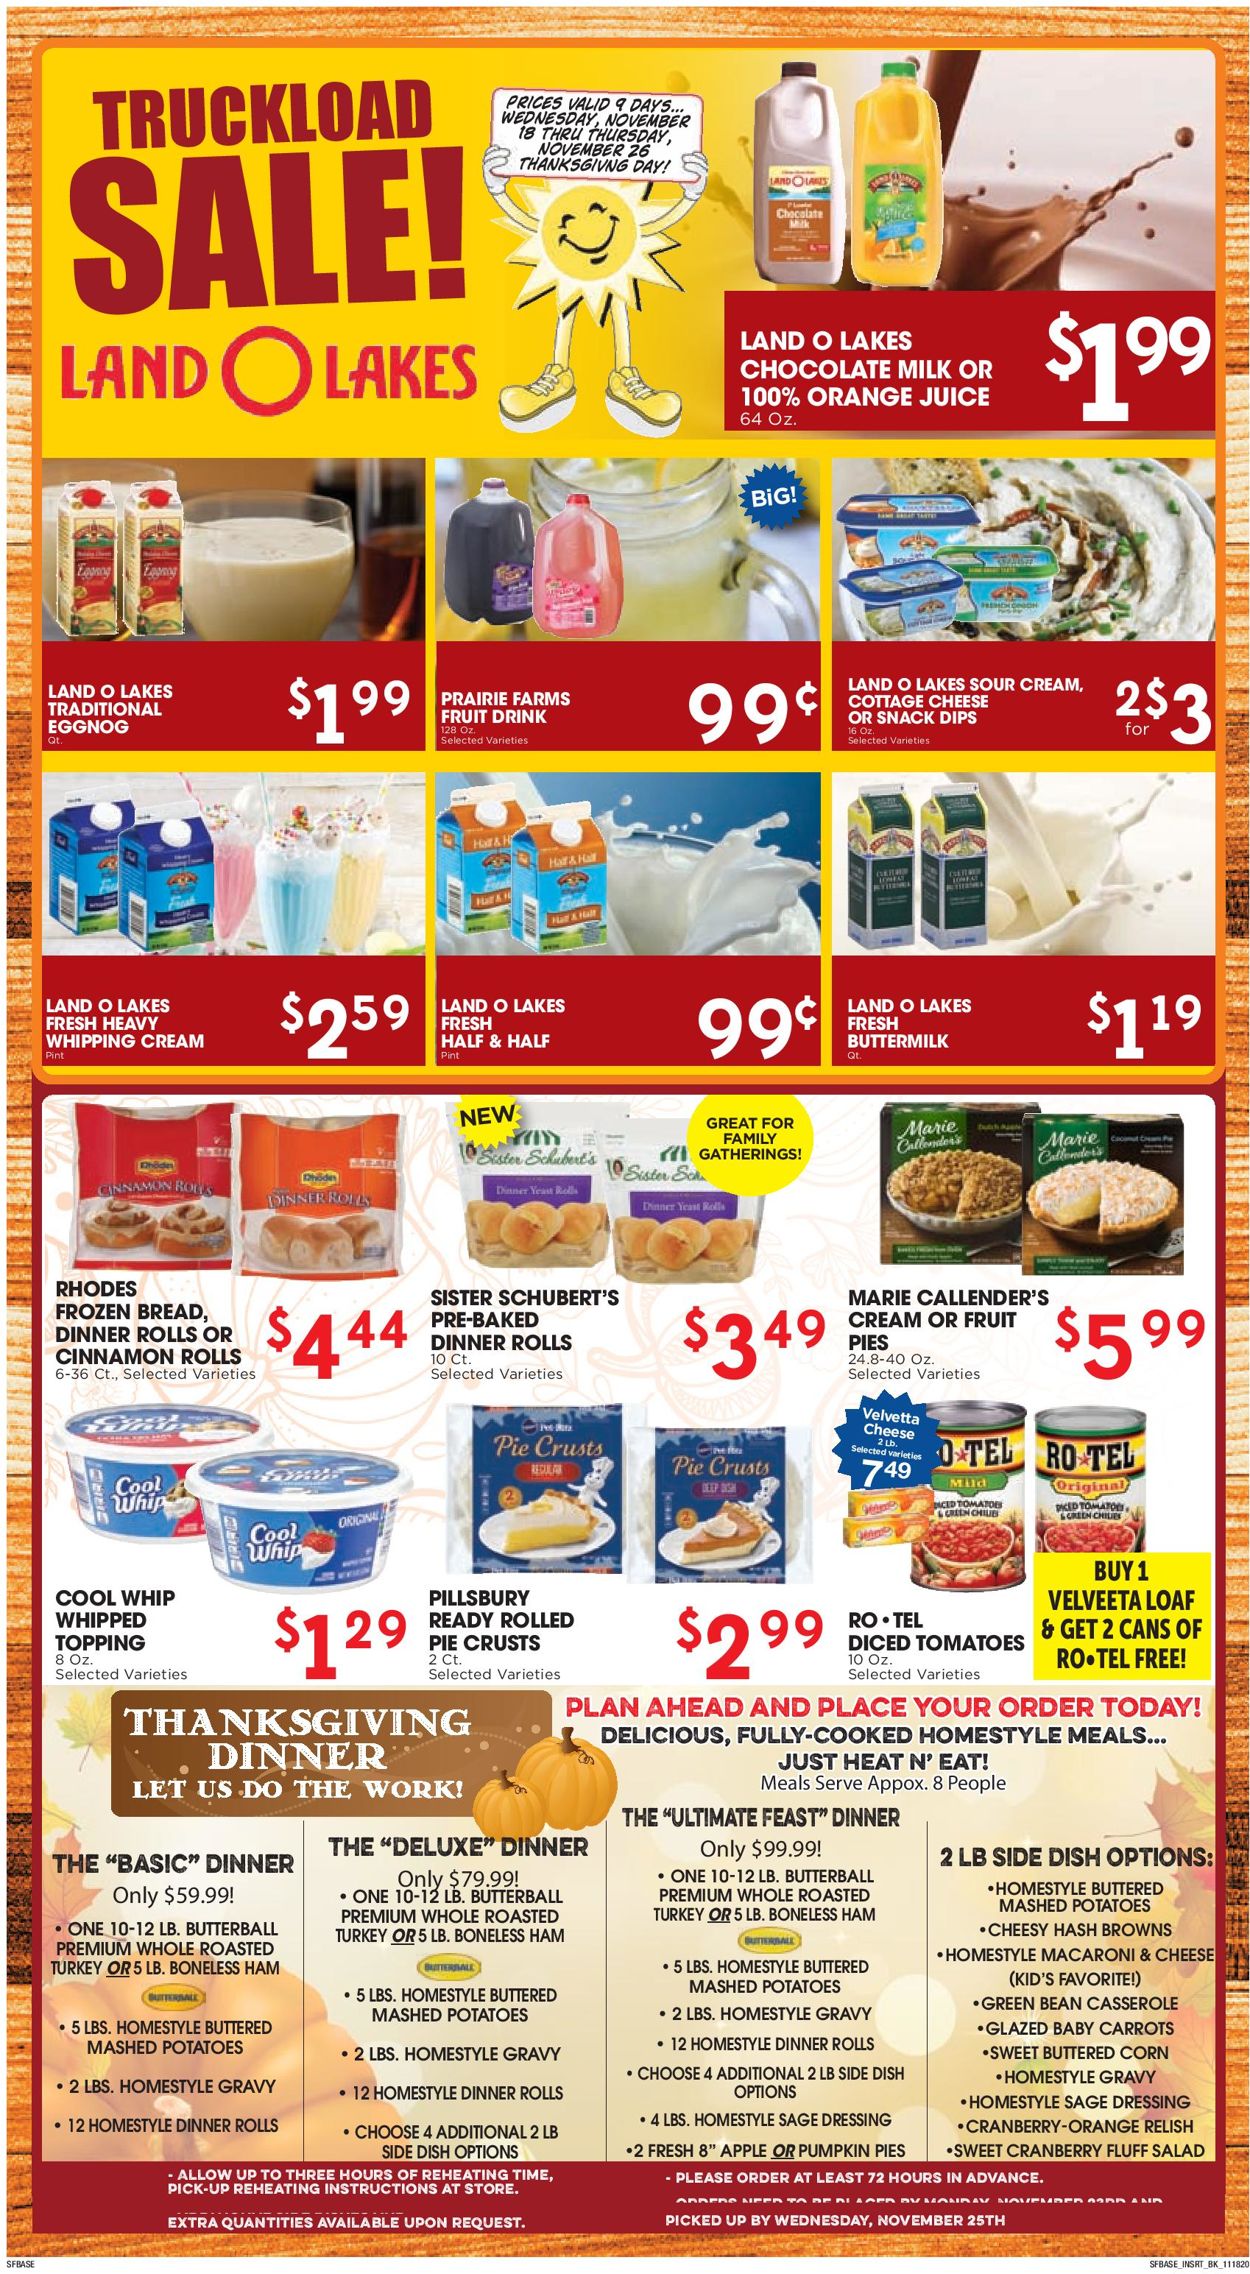 Sunshine Foods Thanksgiving ad 2020 Weekly Ad Circular - valid 11/18-11/26/2020 (Page 9)